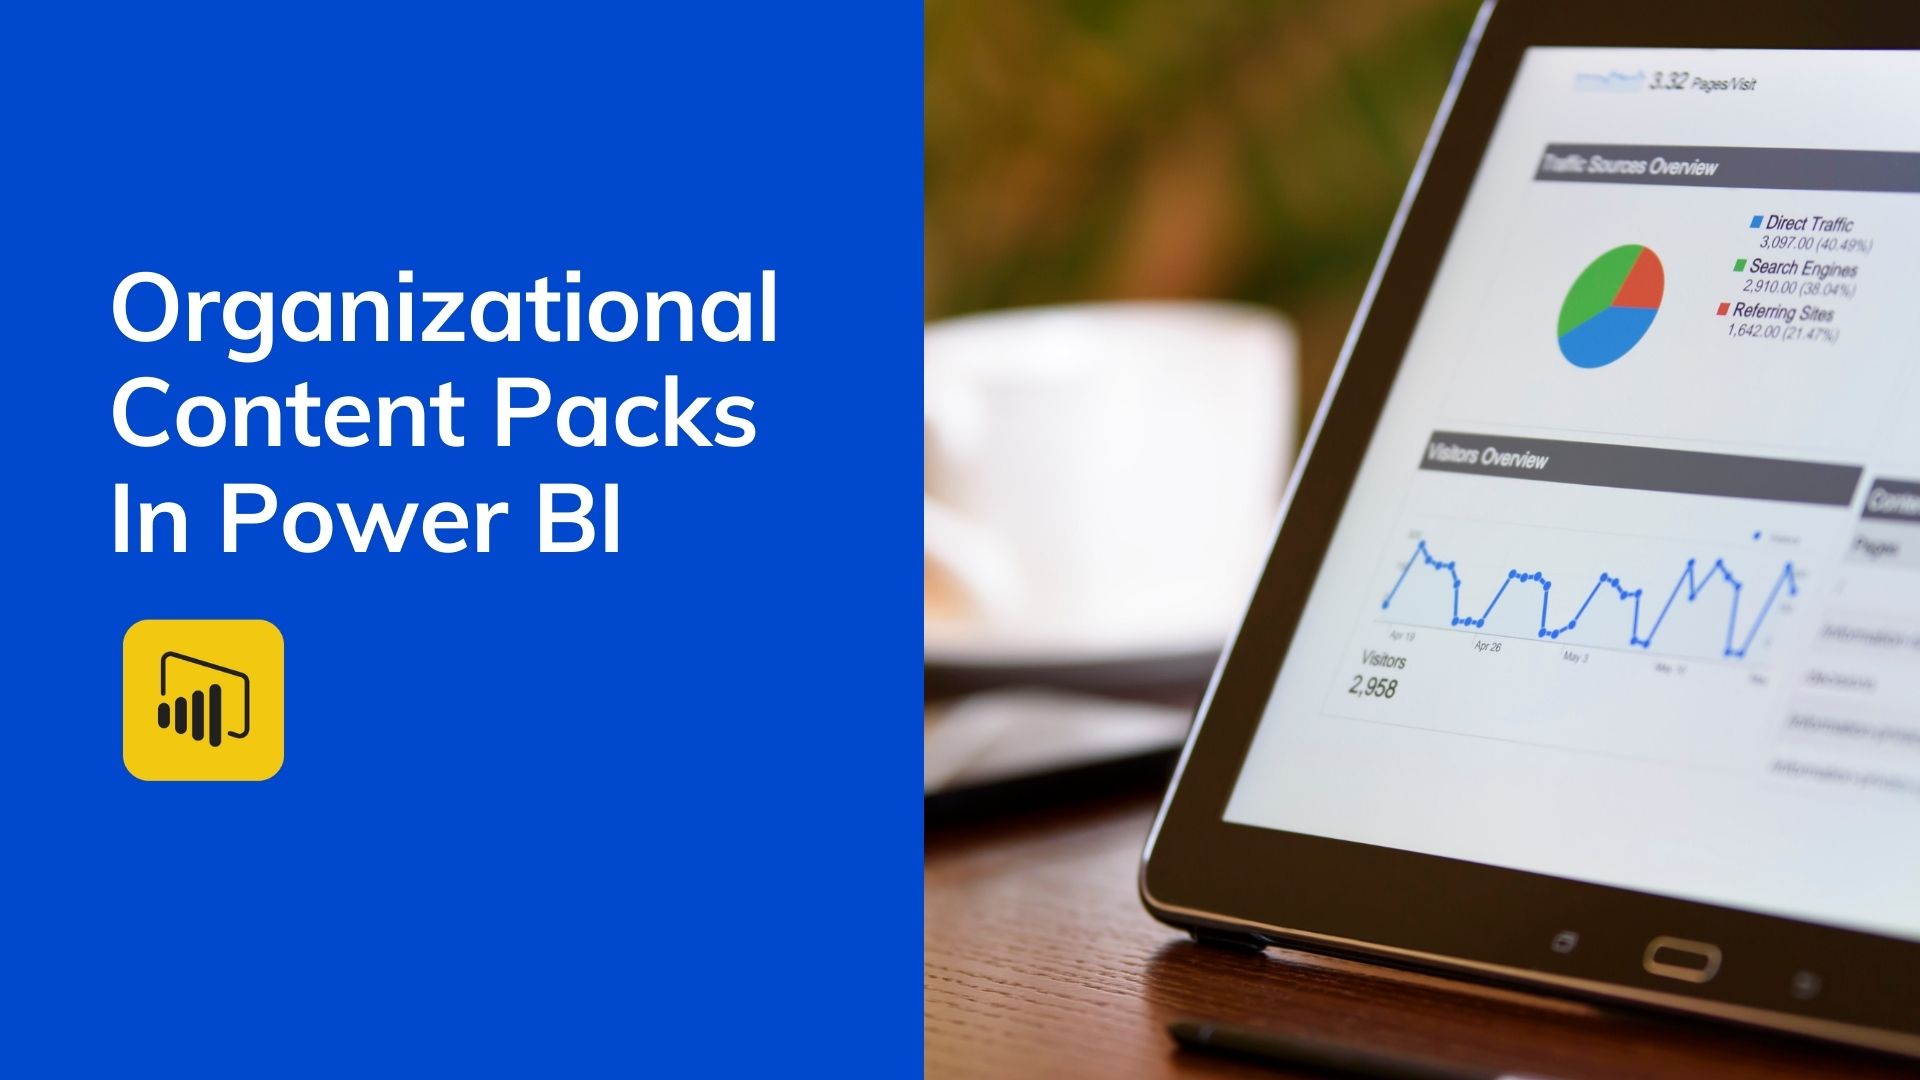 What Are Organizational Content Packs In Power BI?